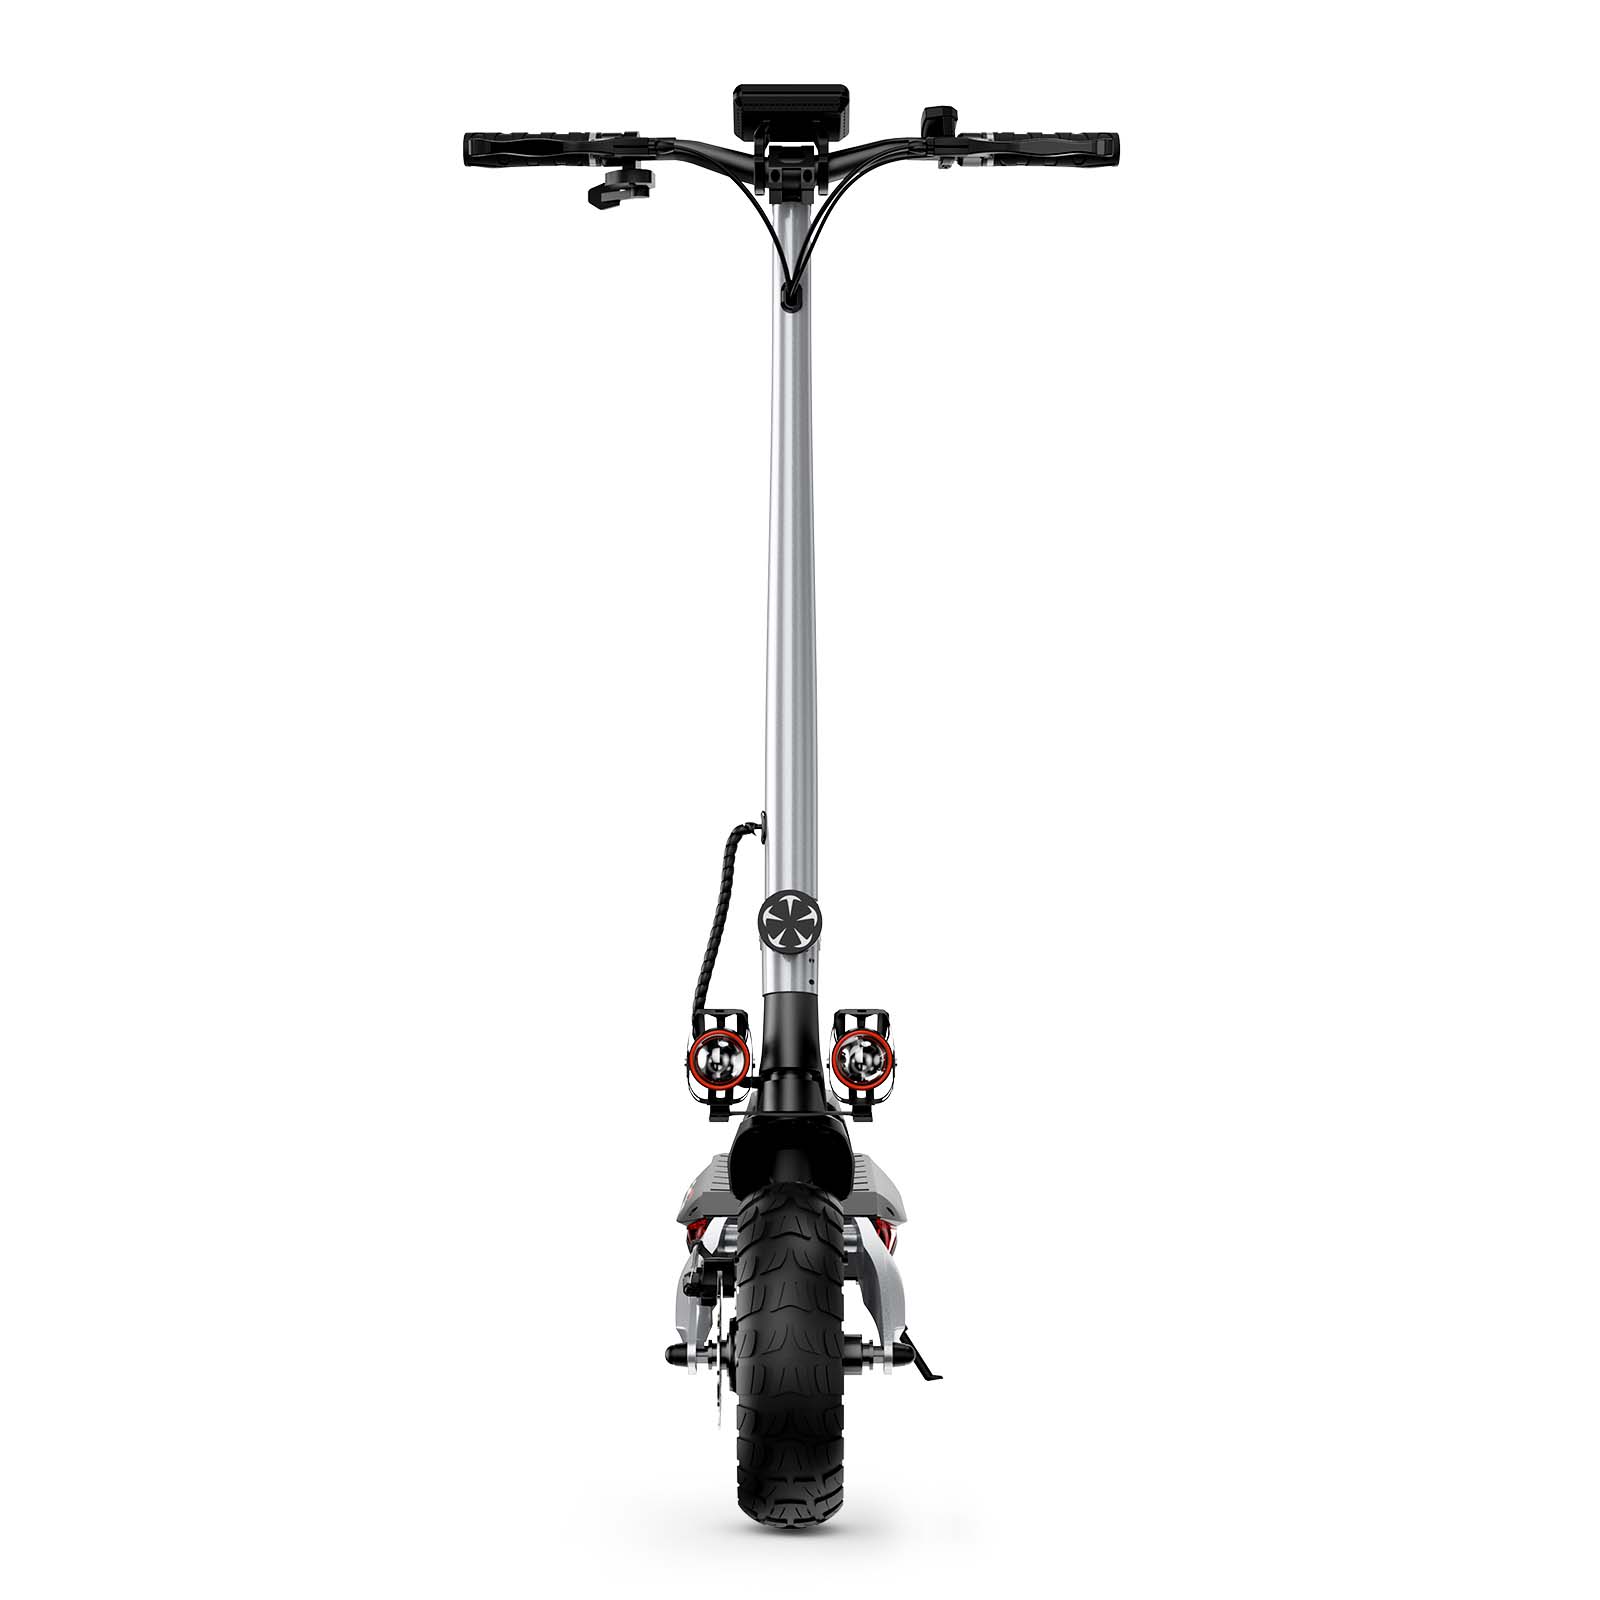 SmartGyro Raptor Electric Scooter